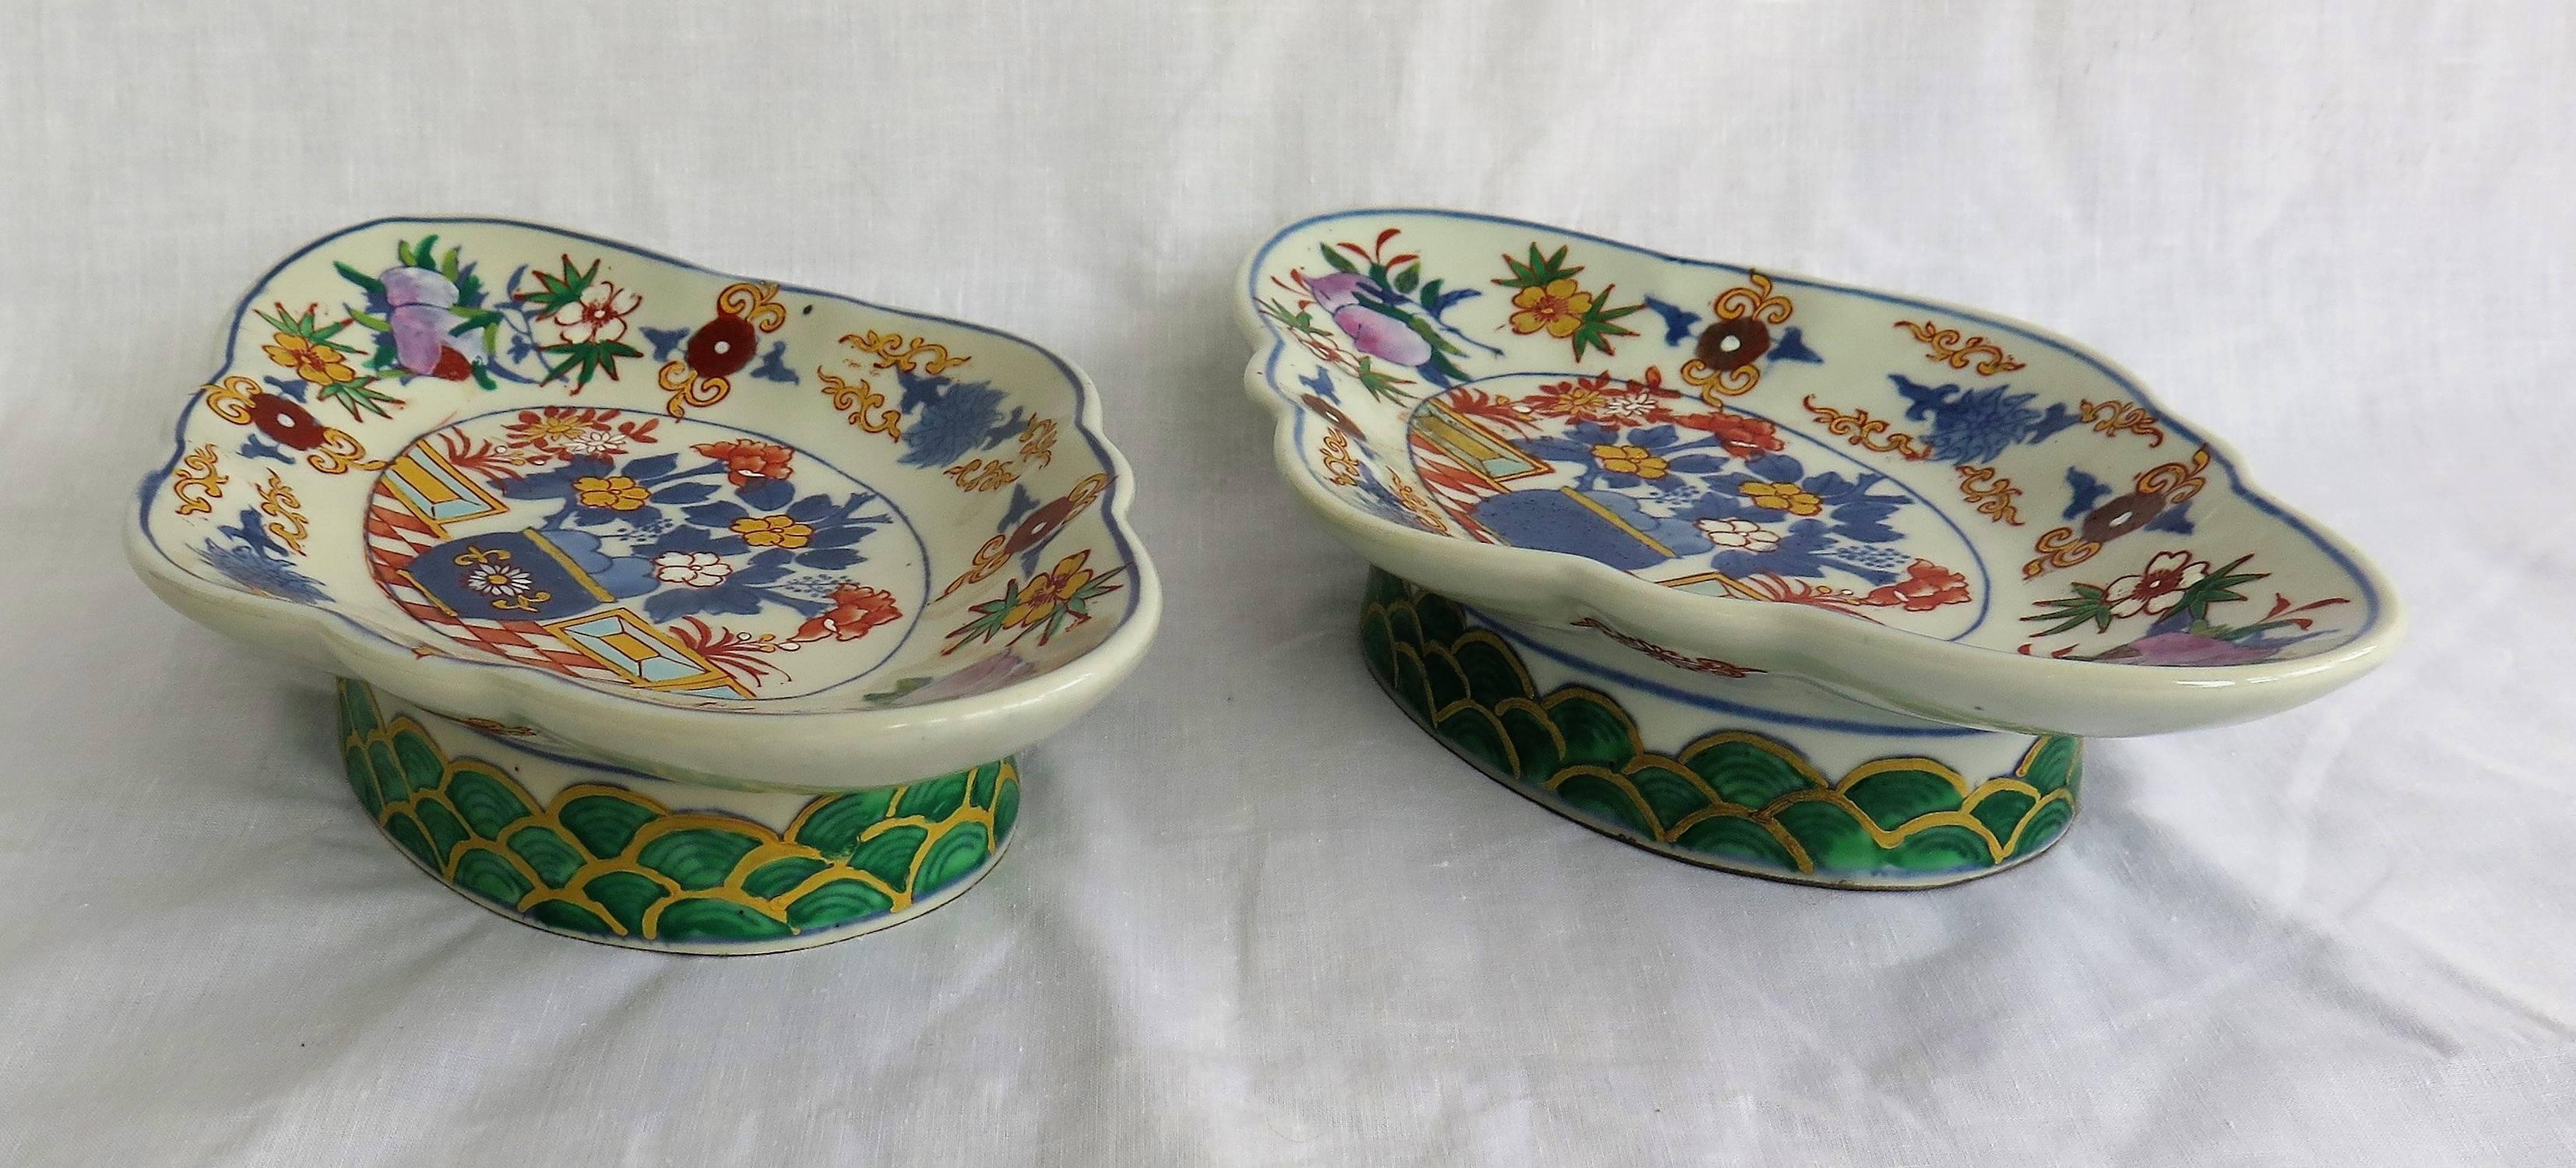 Hand-Painted Pair of Bowls, Chinese Export, Hand Painted Porcelain, Late Qing, C.1900